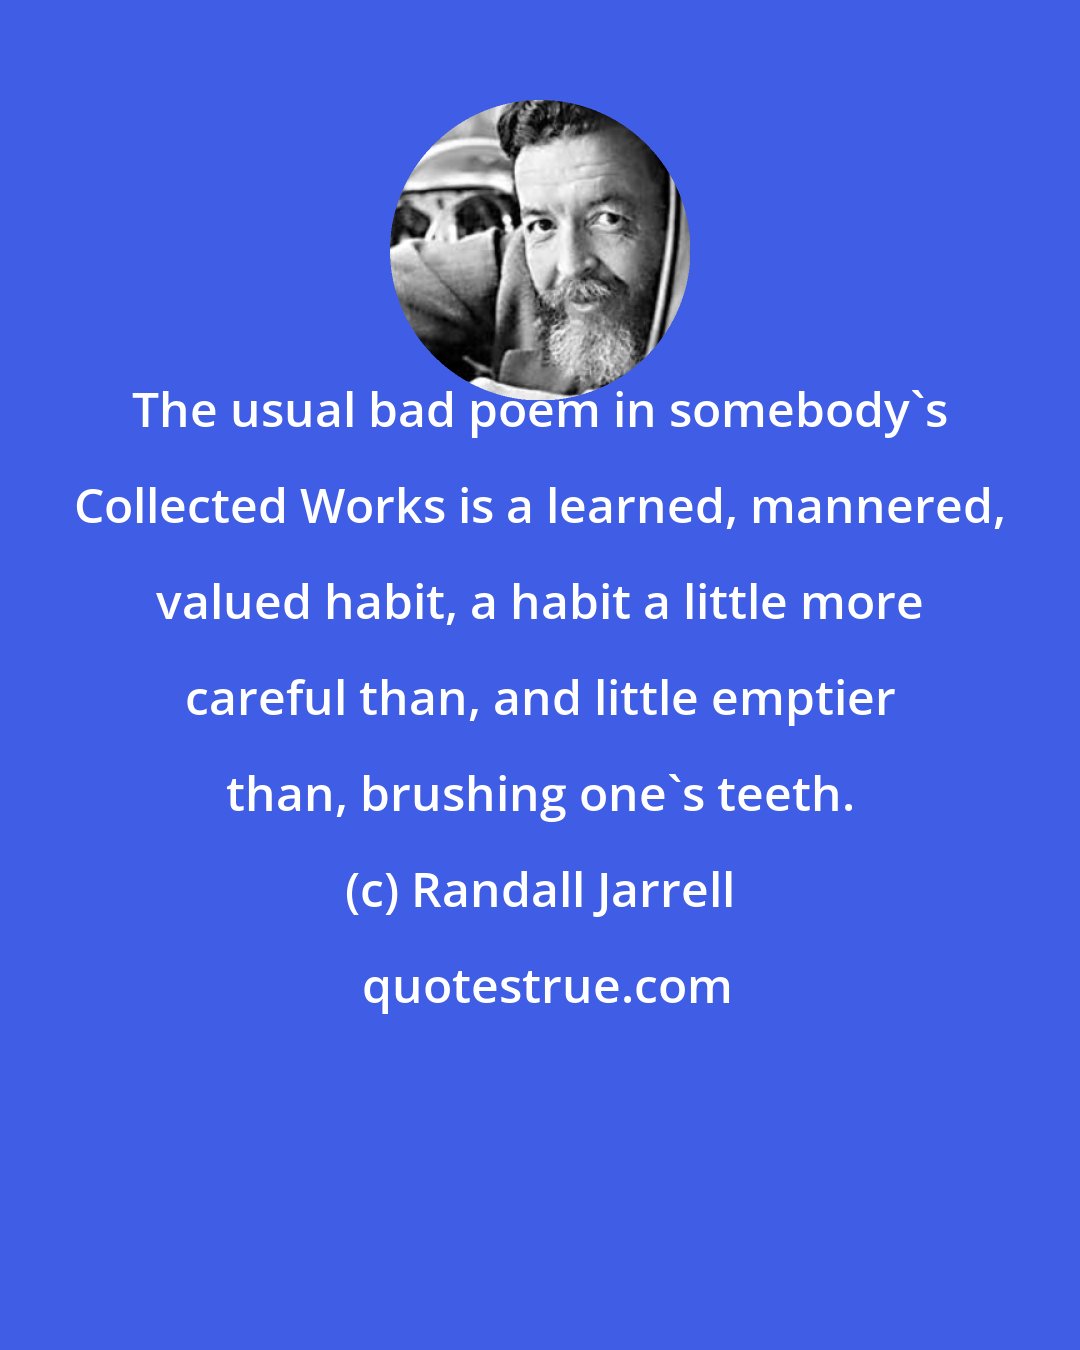 Randall Jarrell: The usual bad poem in somebody's Collected Works is a learned, mannered, valued habit, a habit a little more careful than, and little emptier than, brushing one's teeth.